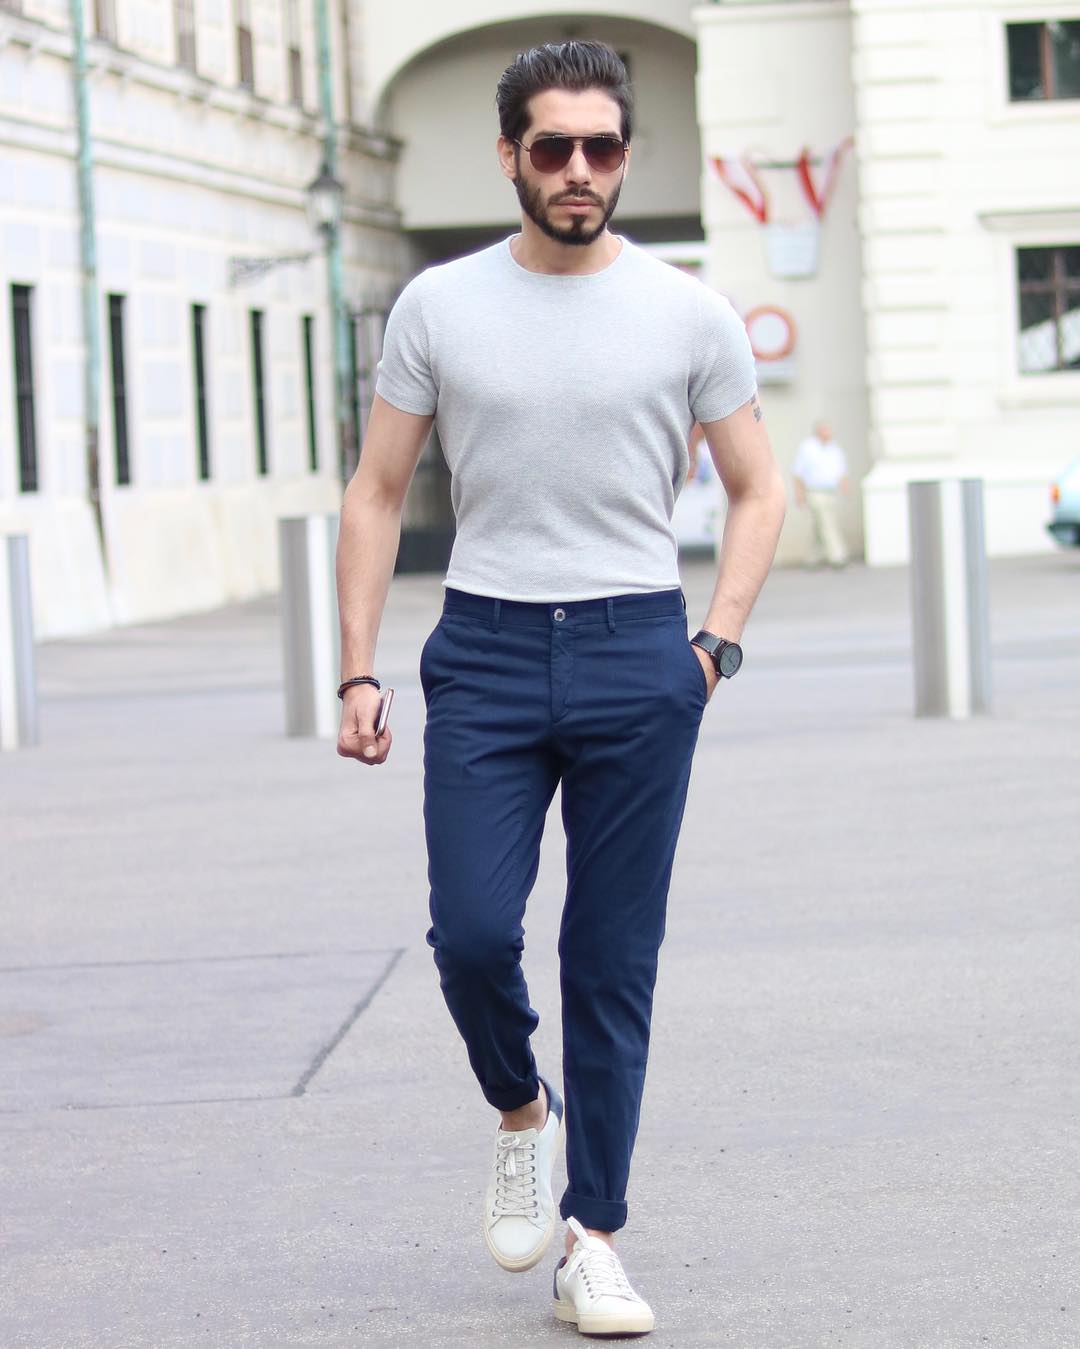 5 Pants & T-shirt Outfits For Men #casualstyle #mensfashion #pantsandtshirt #streetstyle